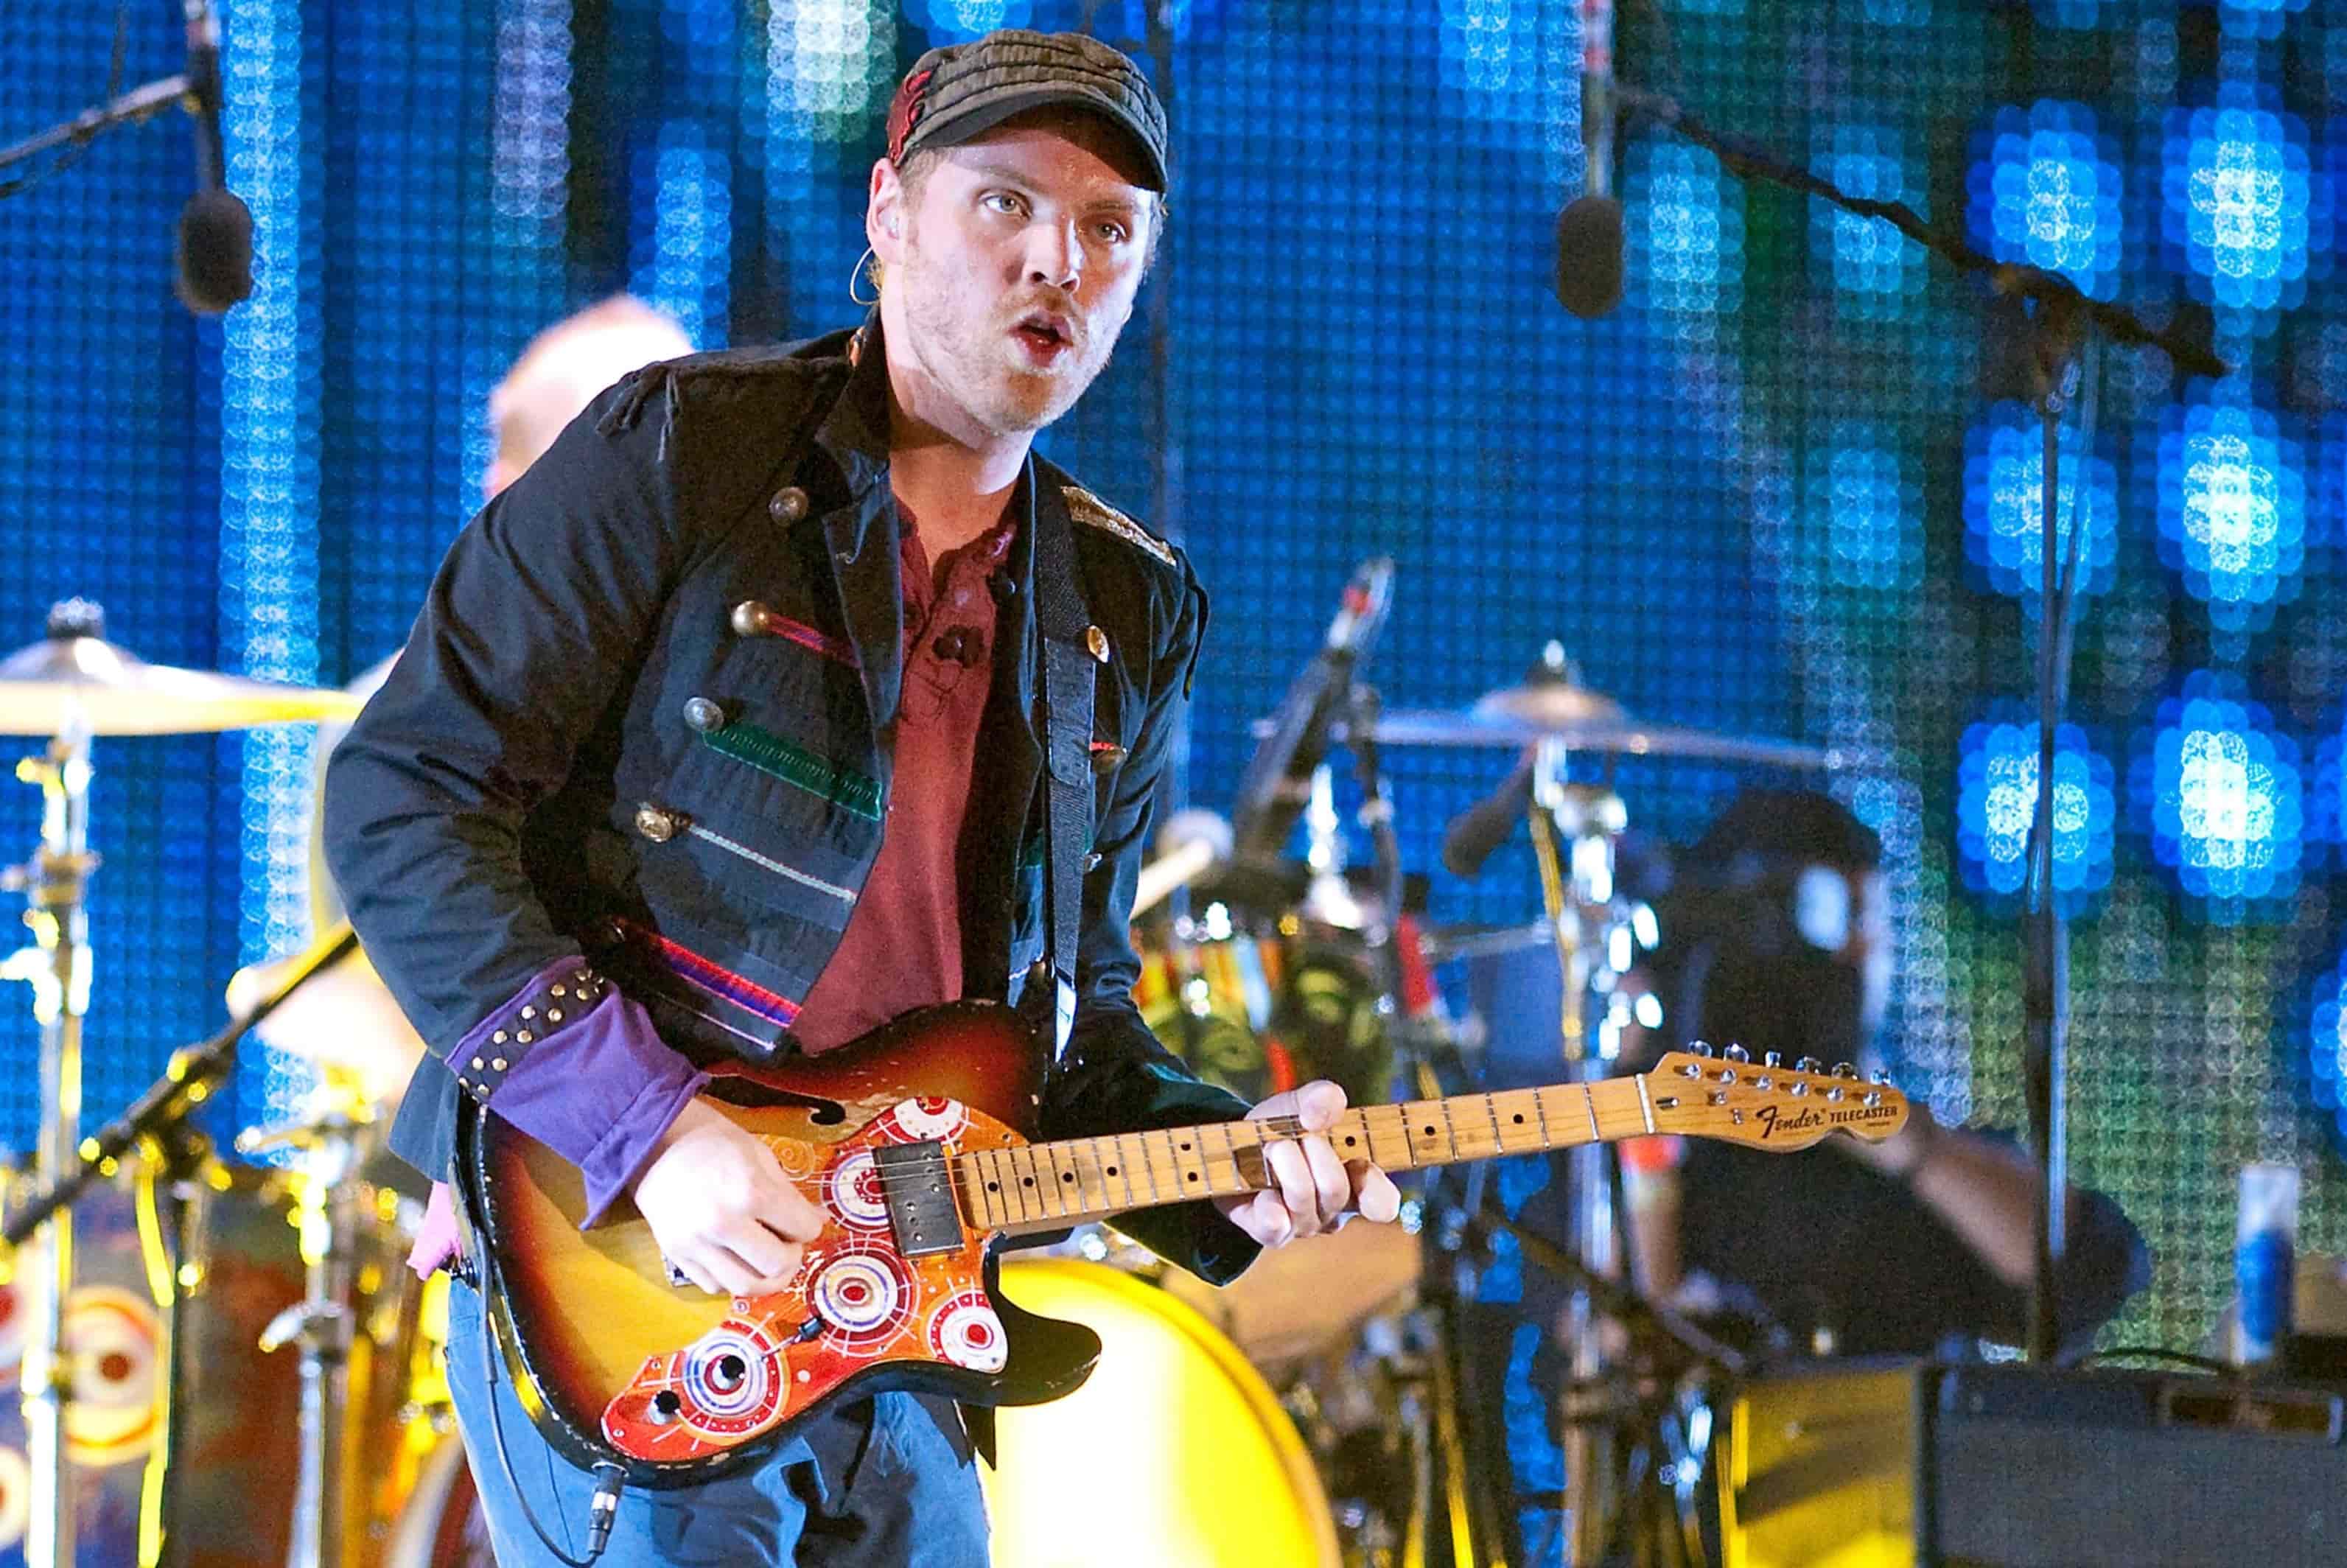 27 Fun Facts About Coldplay - The Fact Site